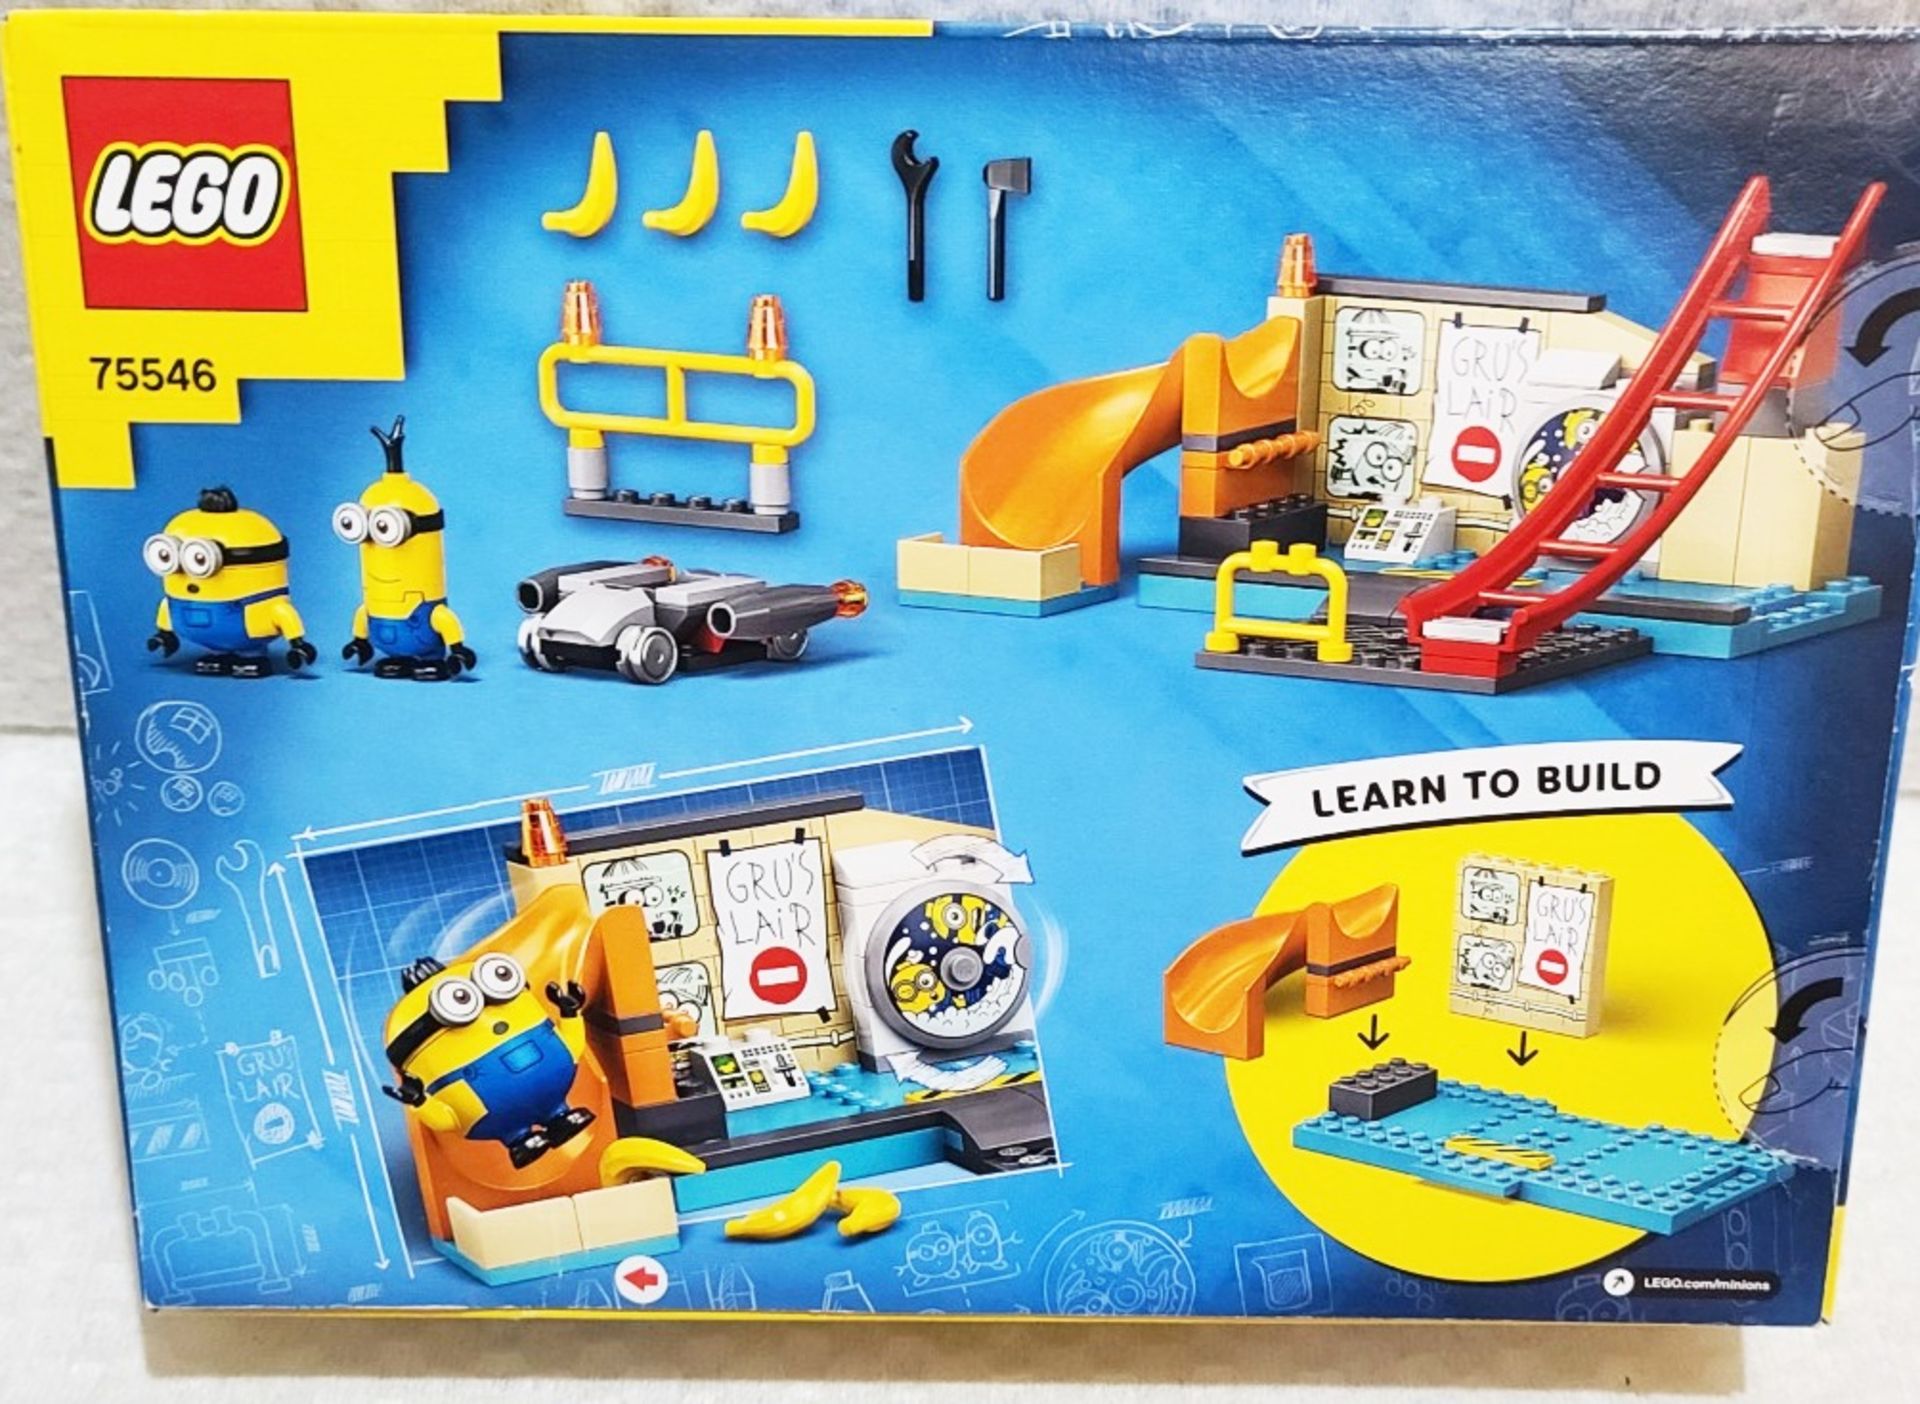 1 x LEGO Minions in Gru’s Lab Building Set - Unused Boxed Stock - Image 5 of 5